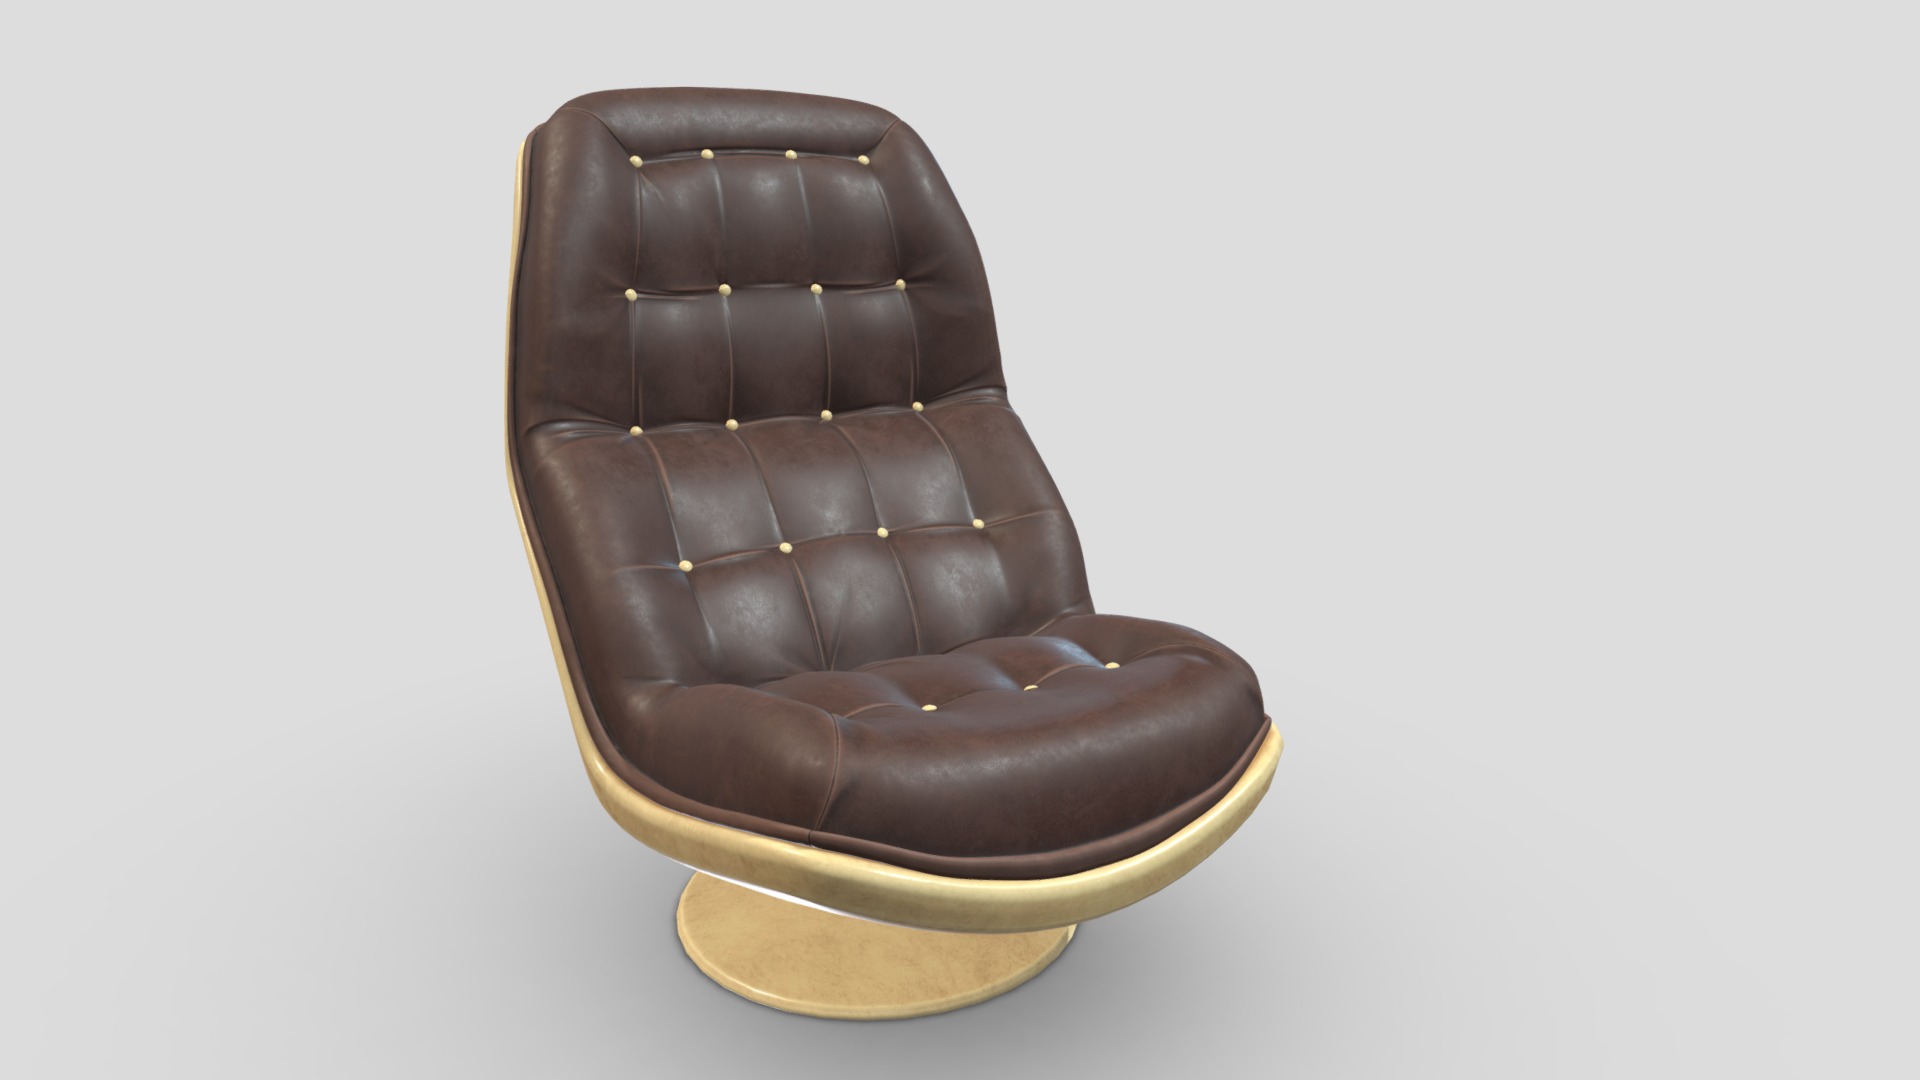 3D model Arm Chair 04 - This is a 3D model of the Arm Chair 04. The 3D model is about a brown leather chair.